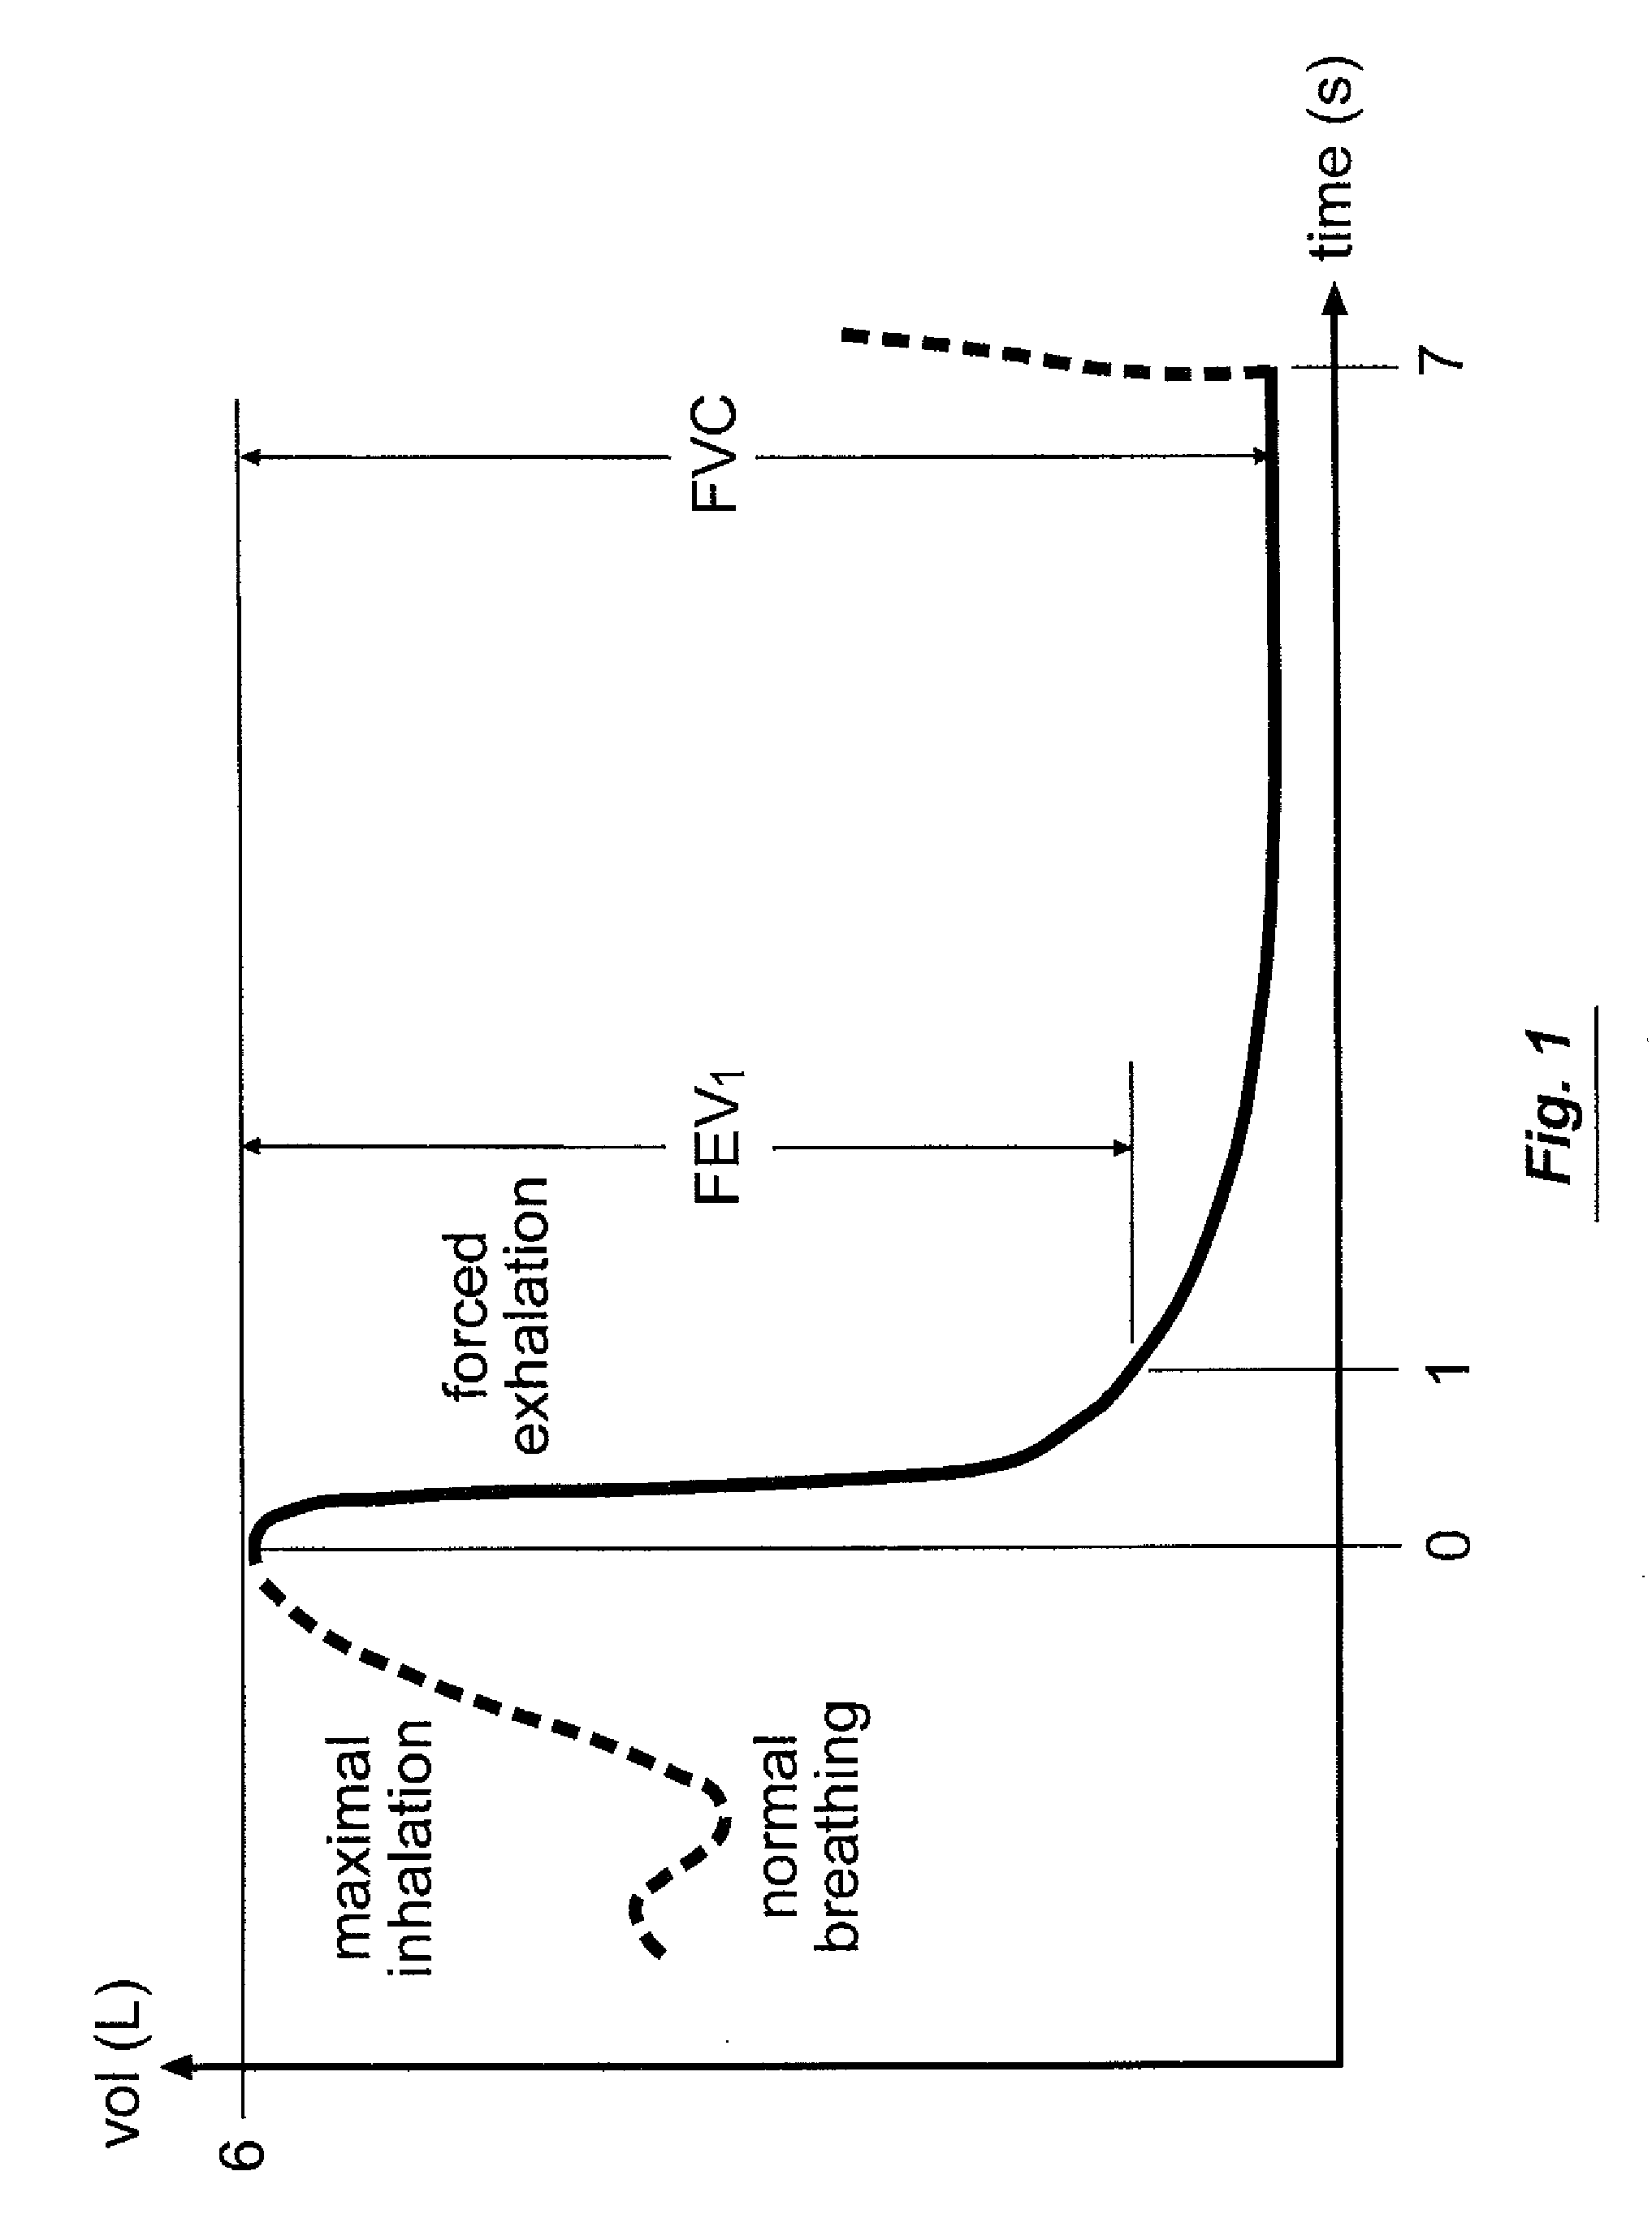 Breath alcohol sampling system with spirometric client identity confirmation